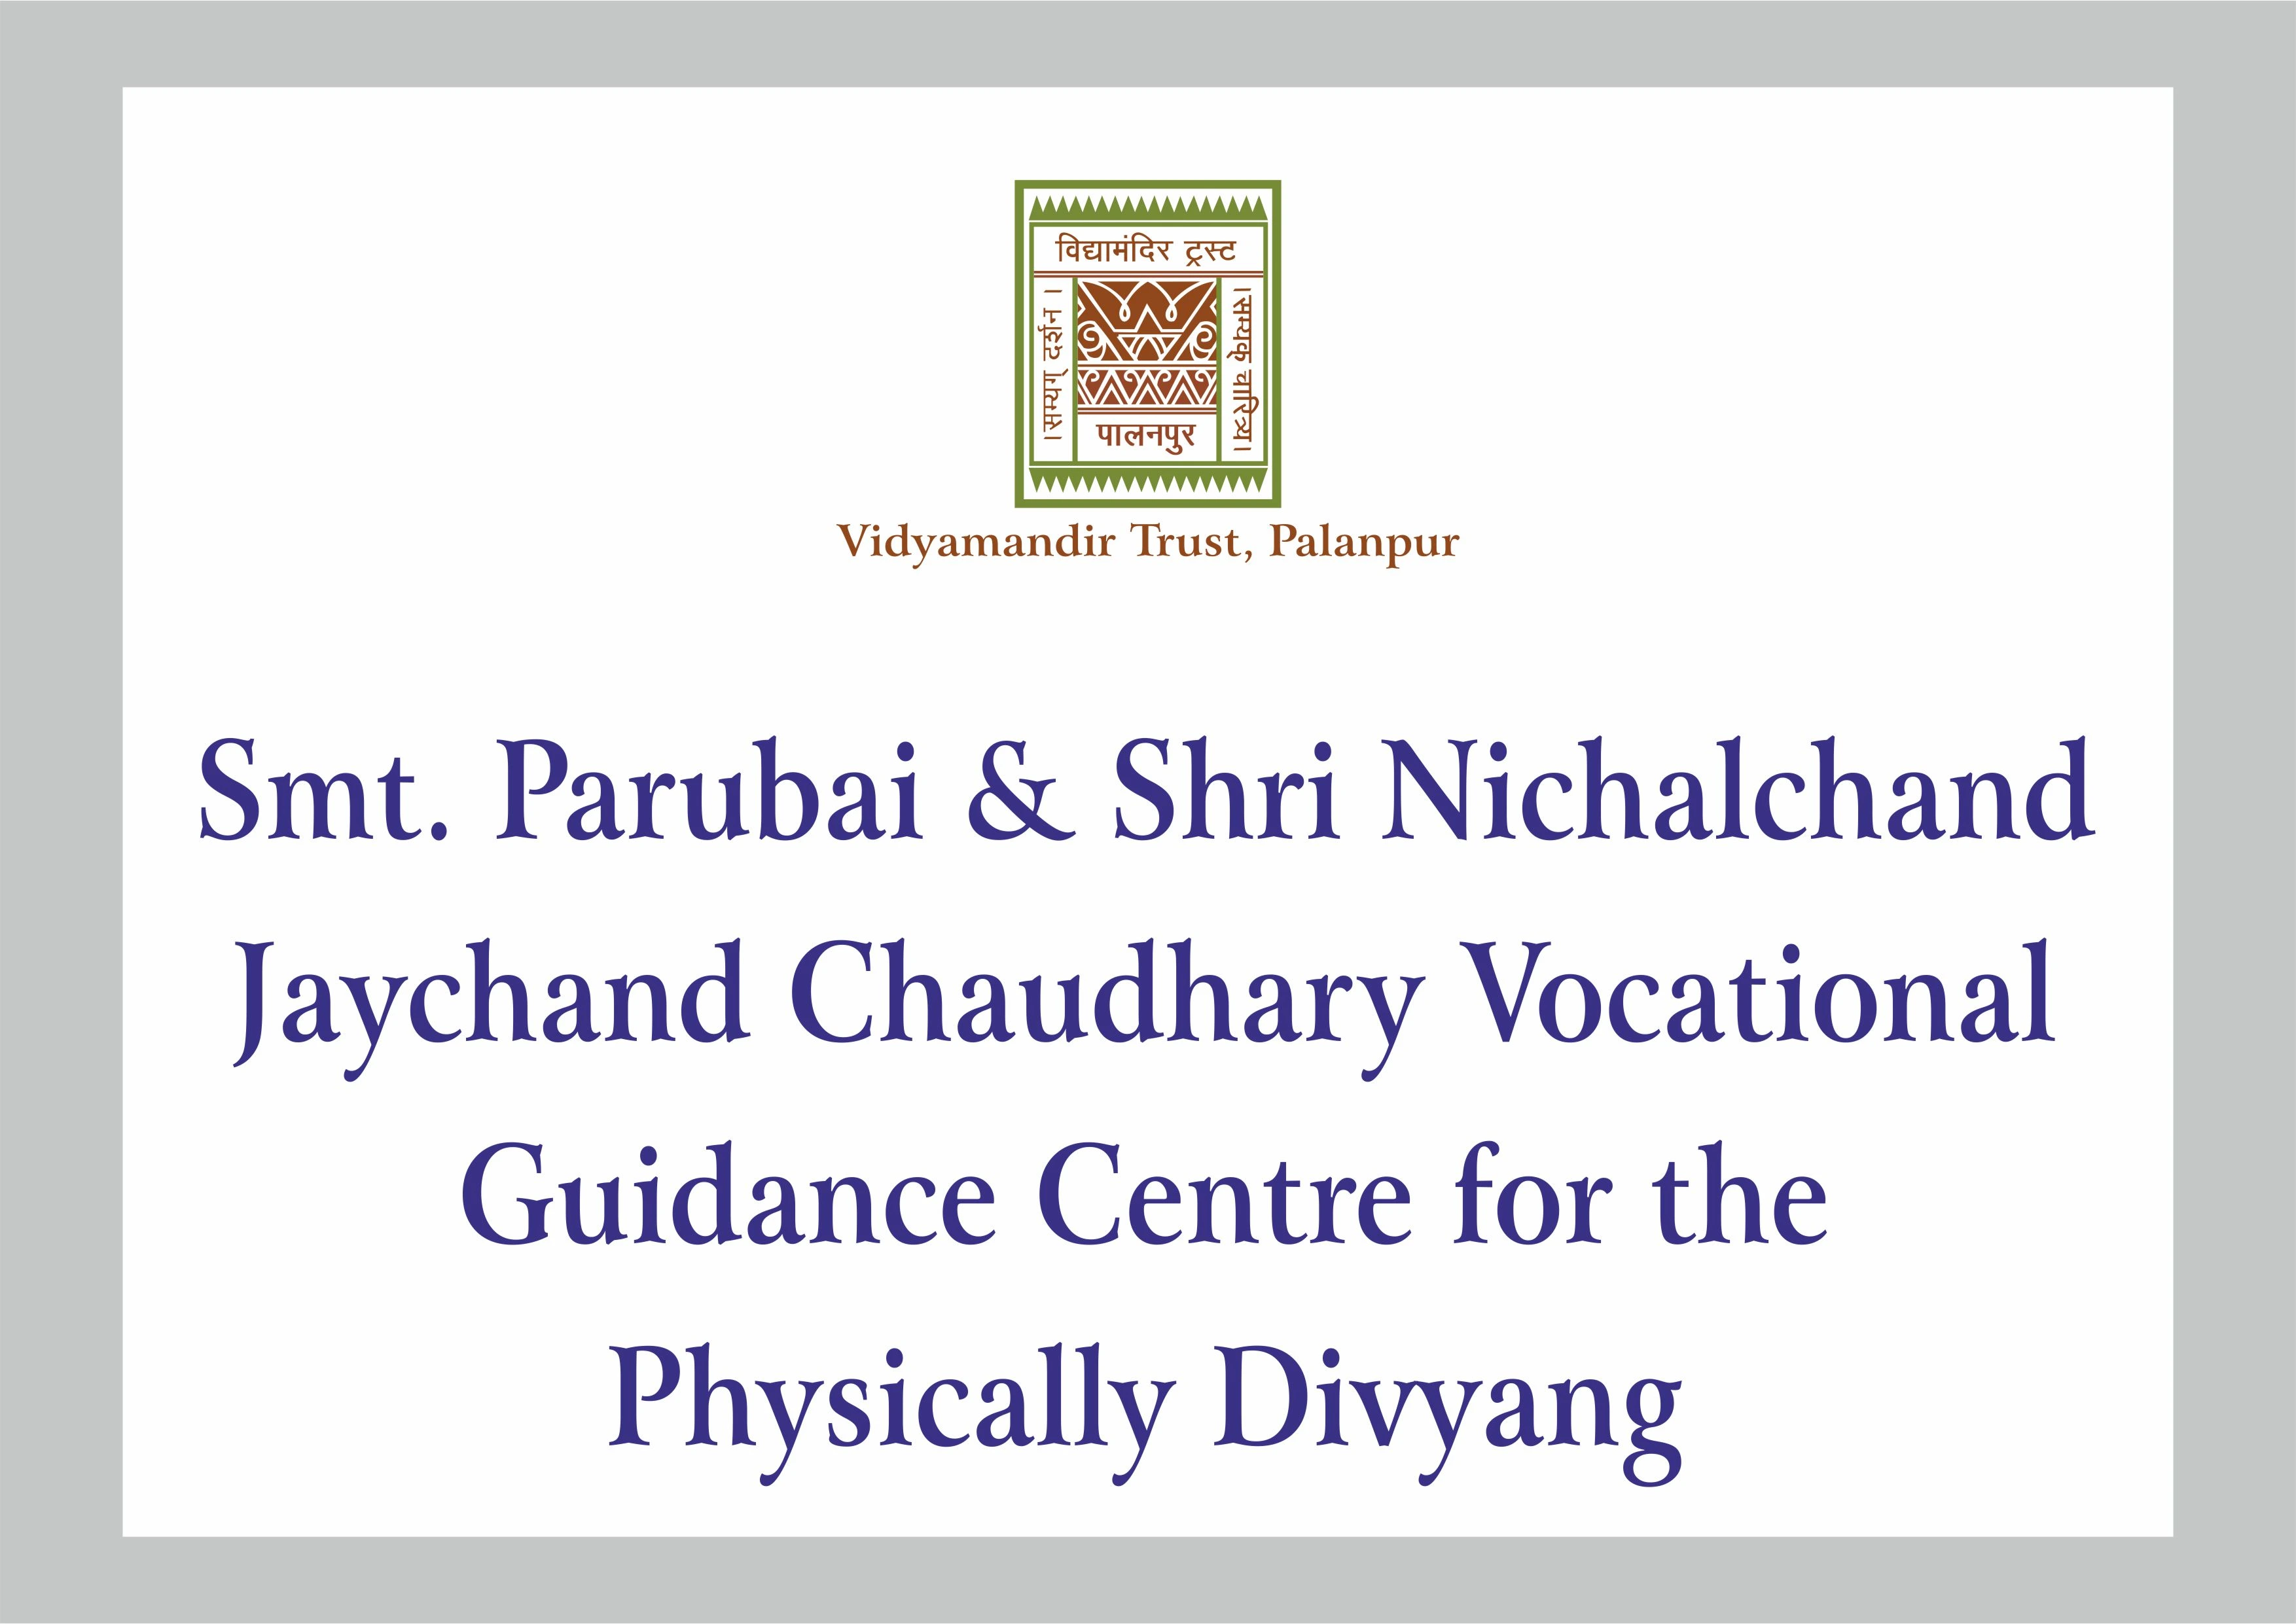 Smt. Parubai & Shri Nihalchand Jaychand Chaudhary Vocational Guidance Centre for the Physically Divyang - Building Photo